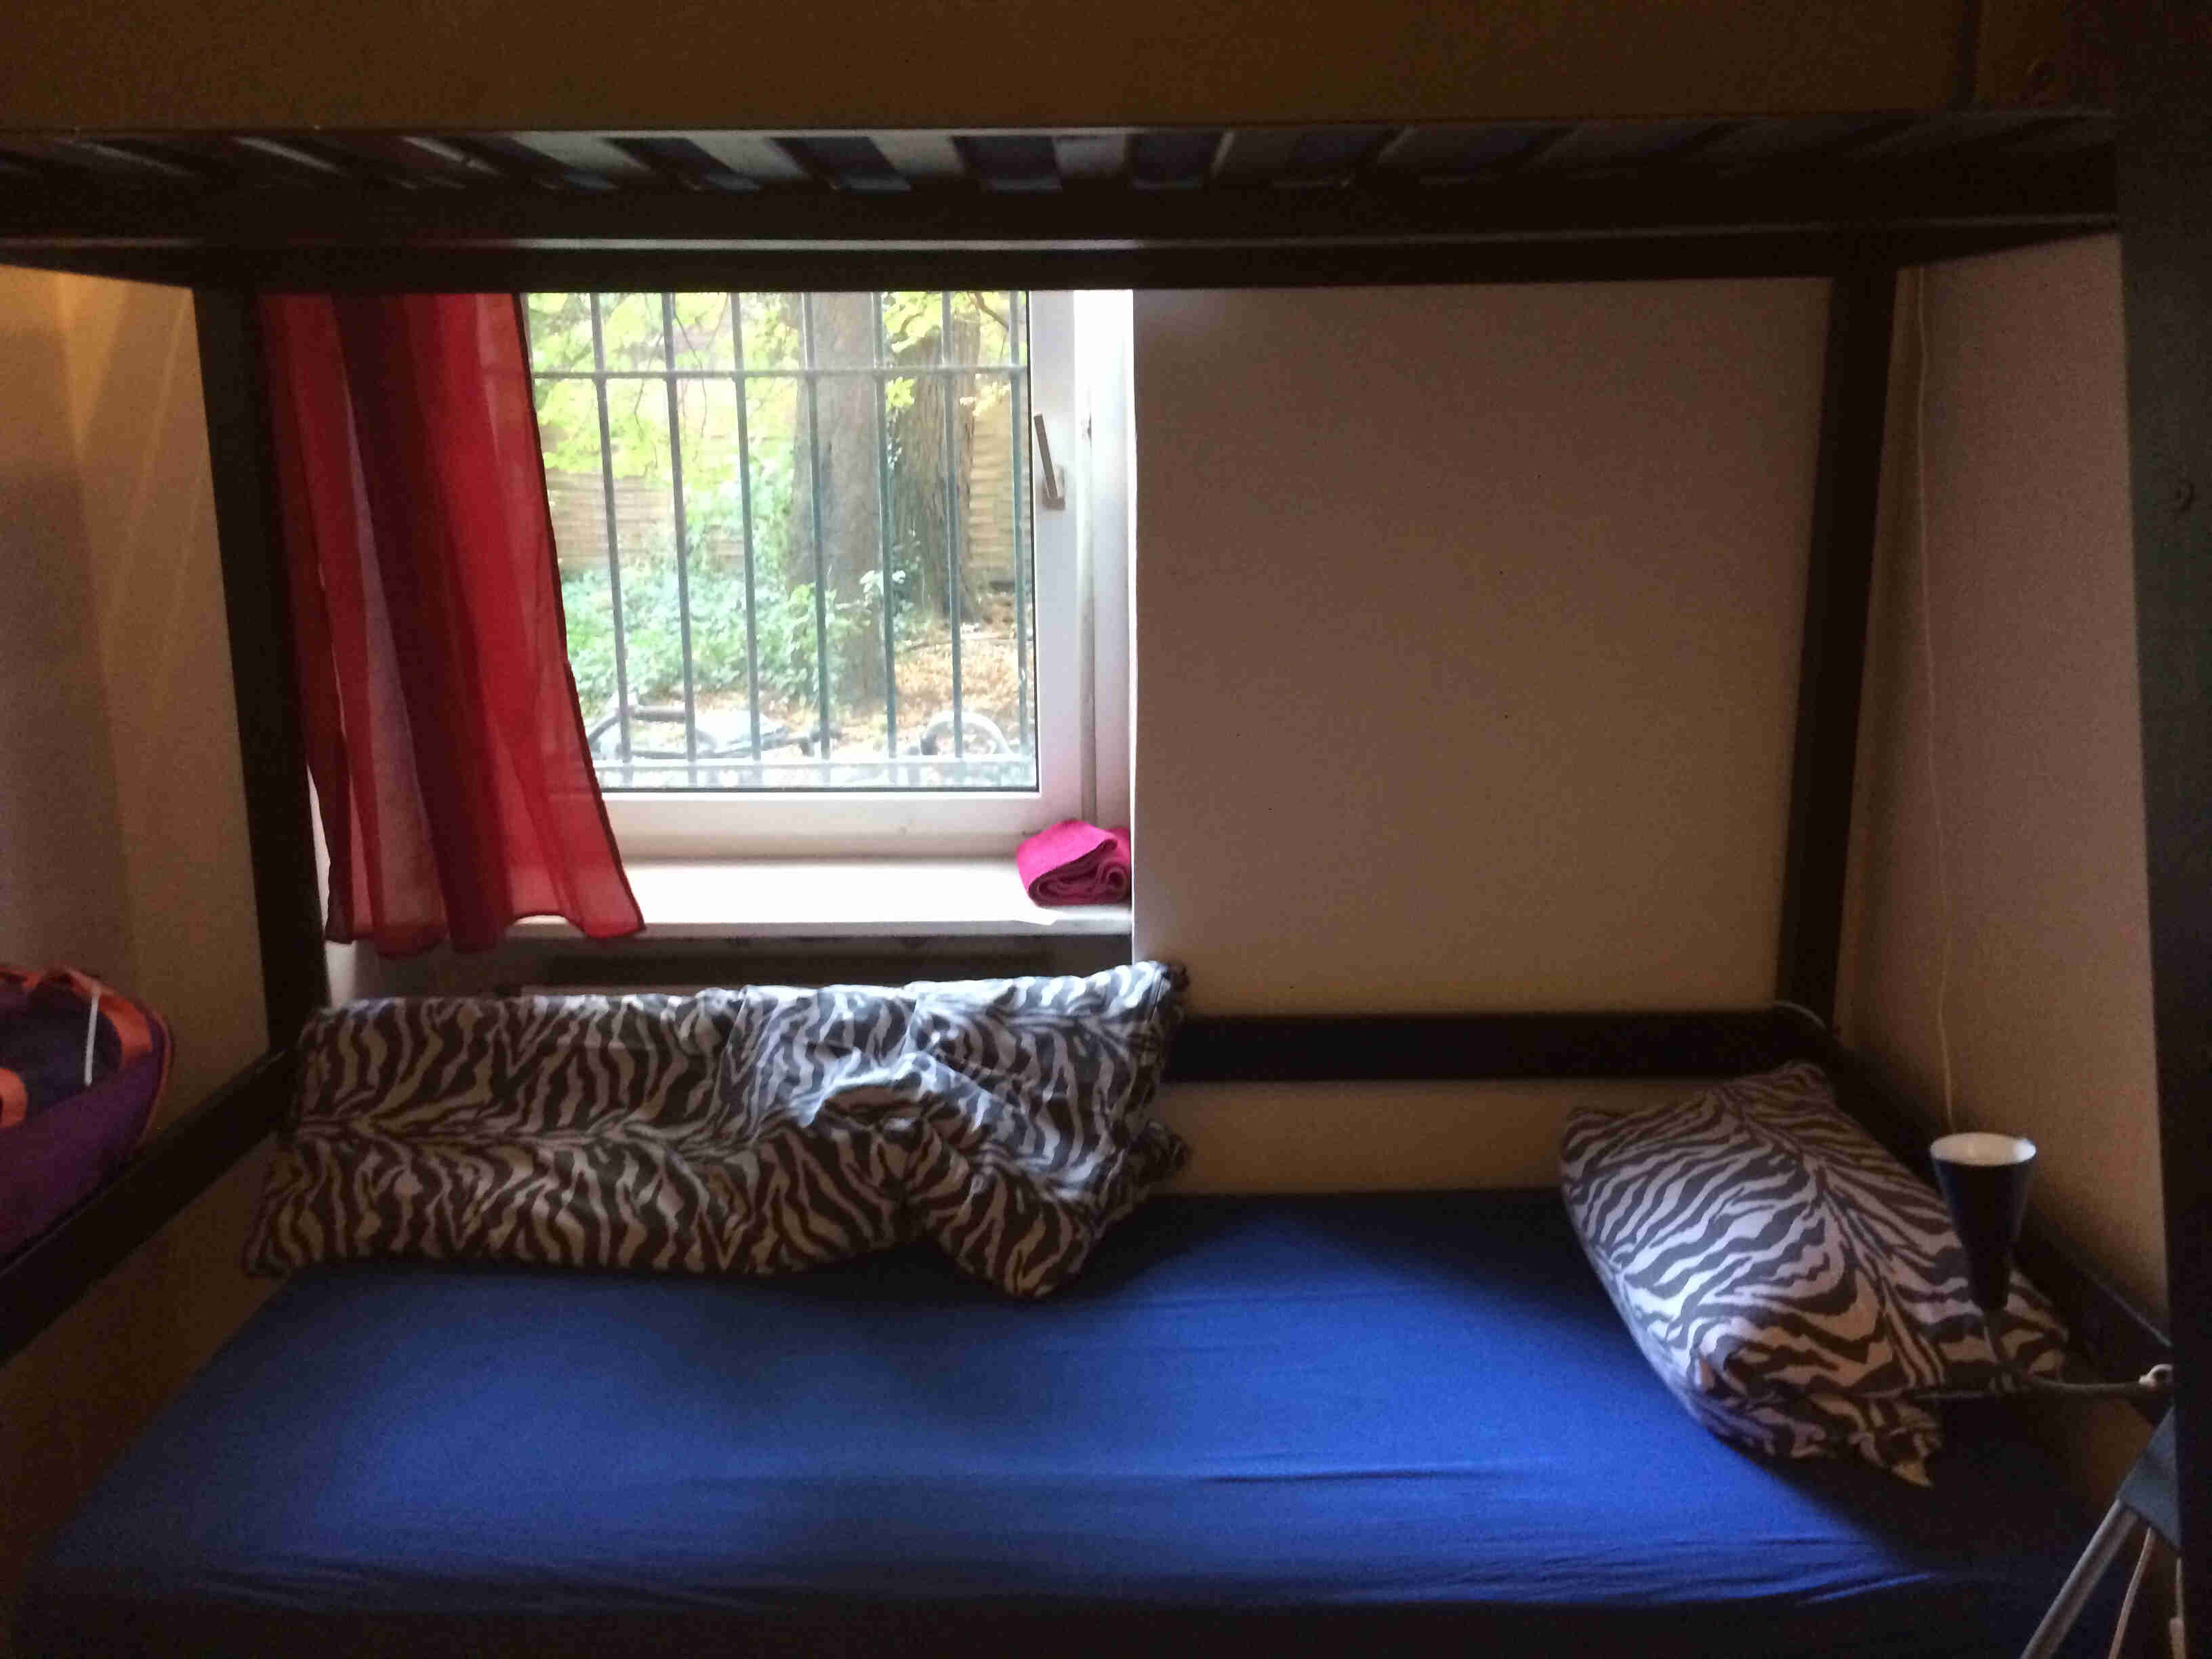 Side view of a the bottom bunk of a bunk bed, in a small room with a window